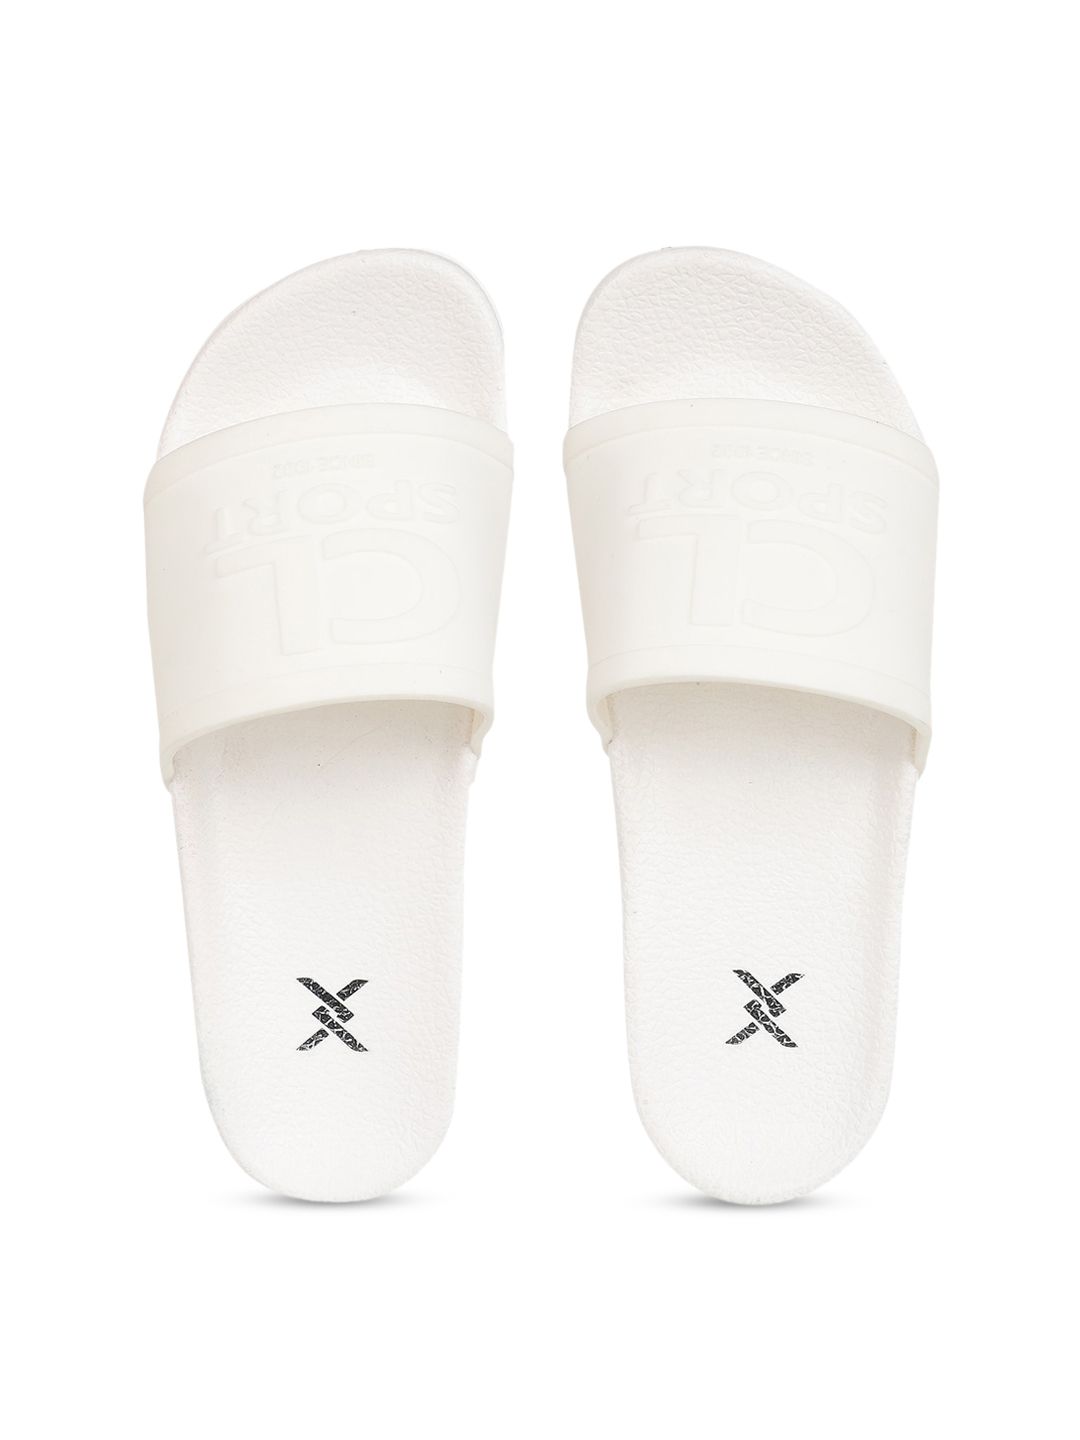 Carlton London sports Women White Solid Sliders Price in India